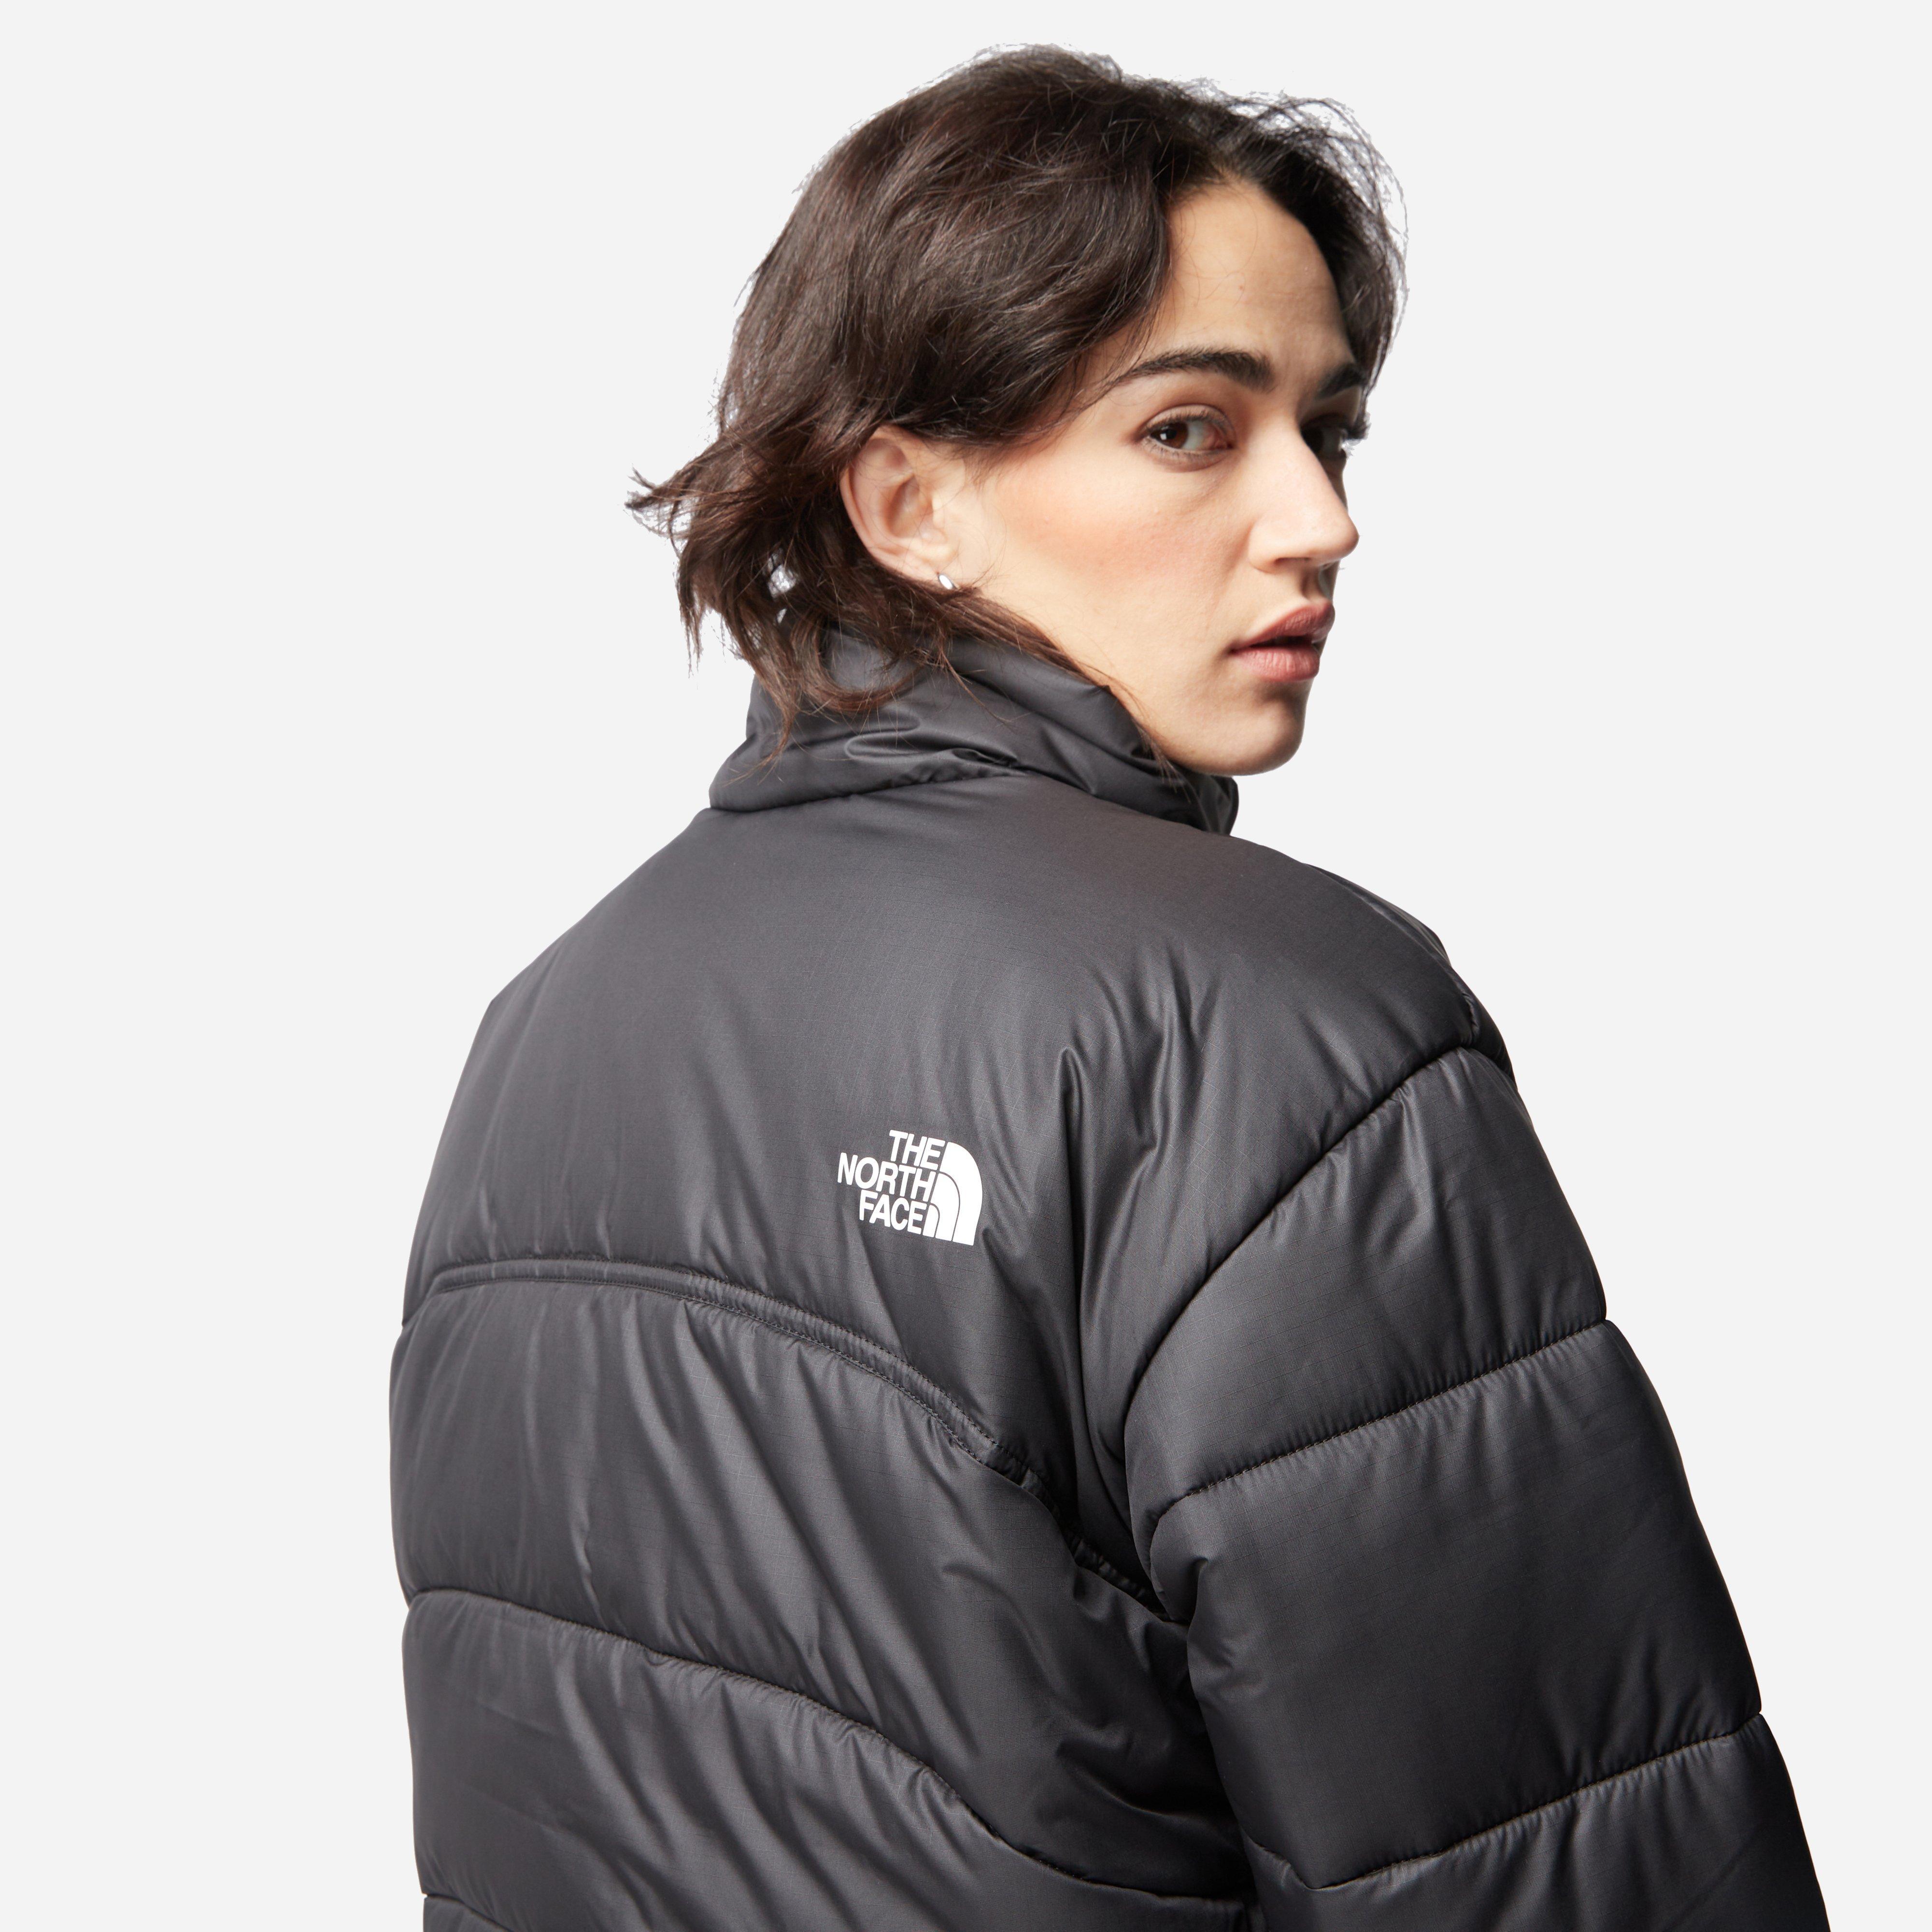 The North Face Nse Jacket 2000 Women's in Black | Lyst